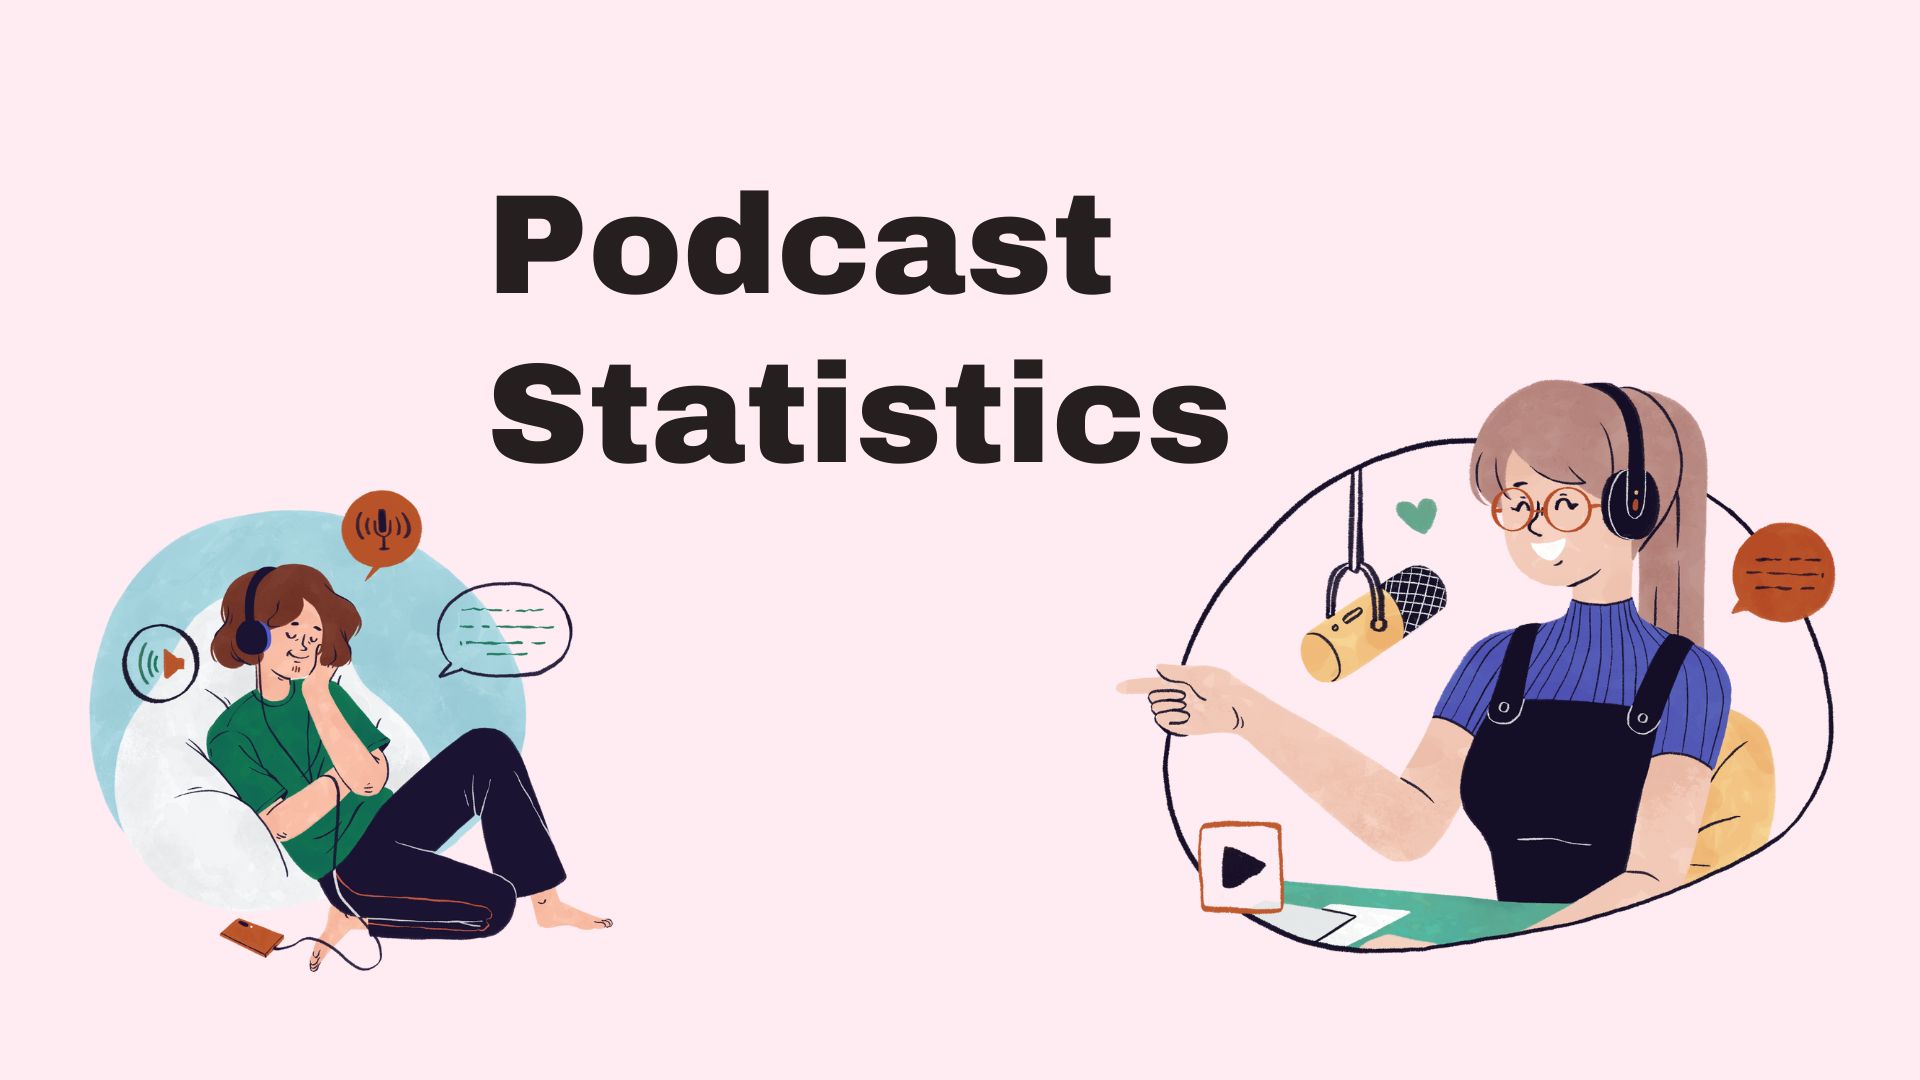 Podcast Statistics 2022 – Future, Demographics and Advertising Trends